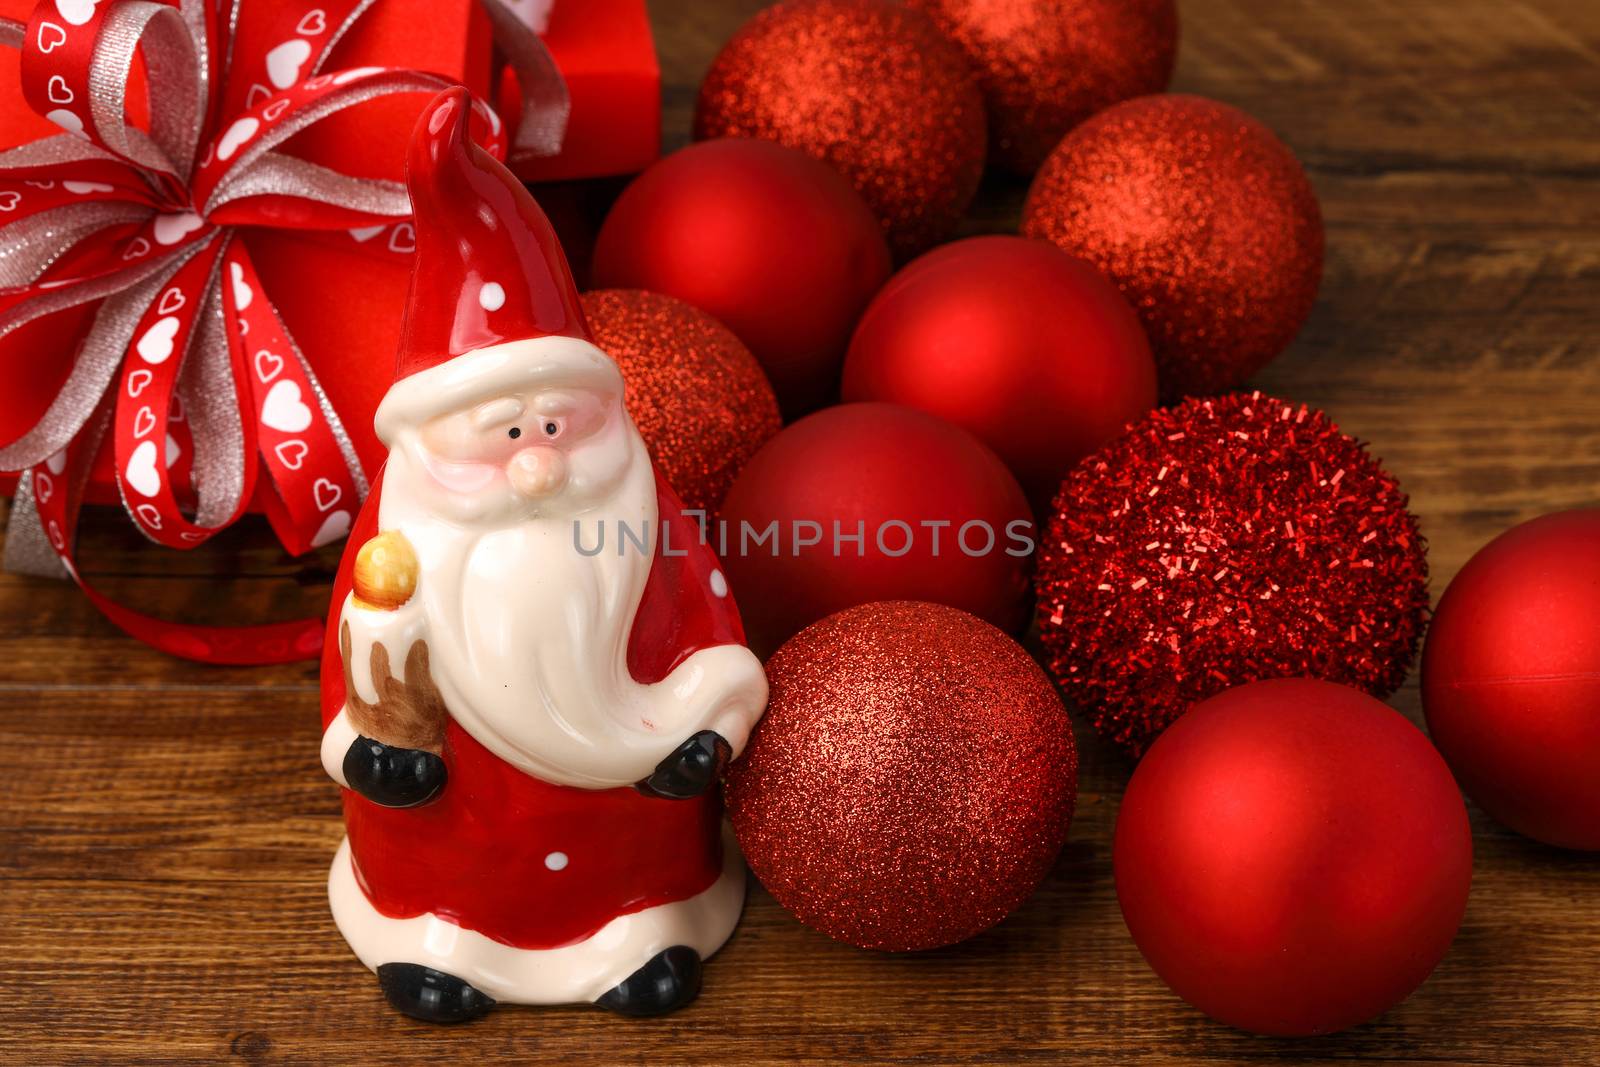 Santa claus with red chrismas baubles and boxes of presents by Nawoot